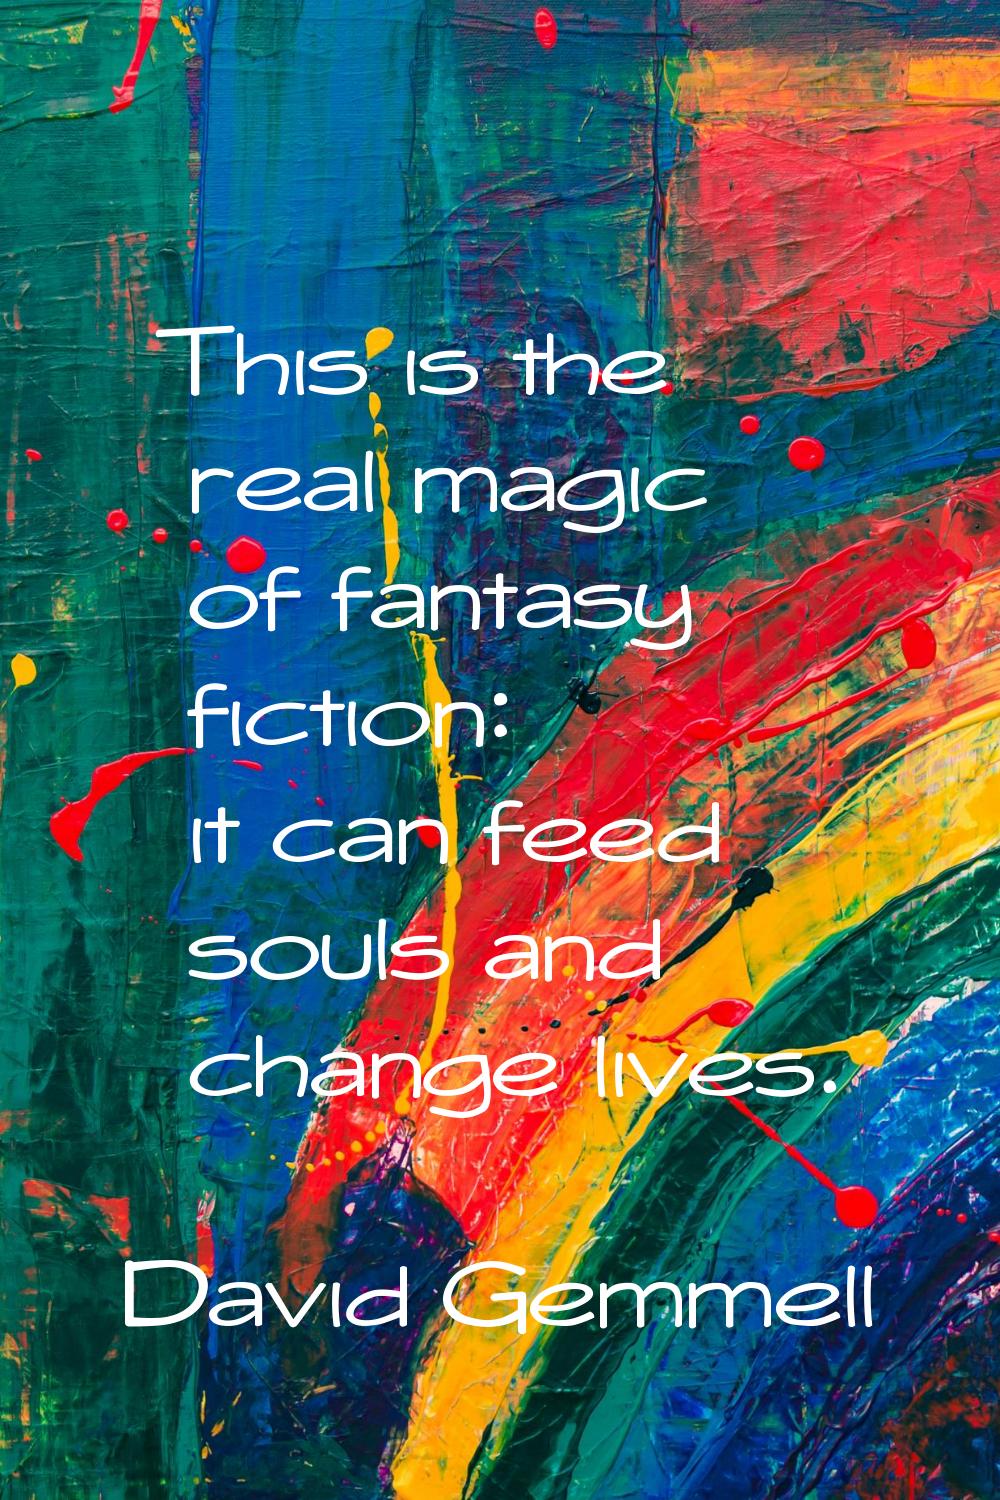 This is the real magic of fantasy fiction: it can feed souls and change lives.